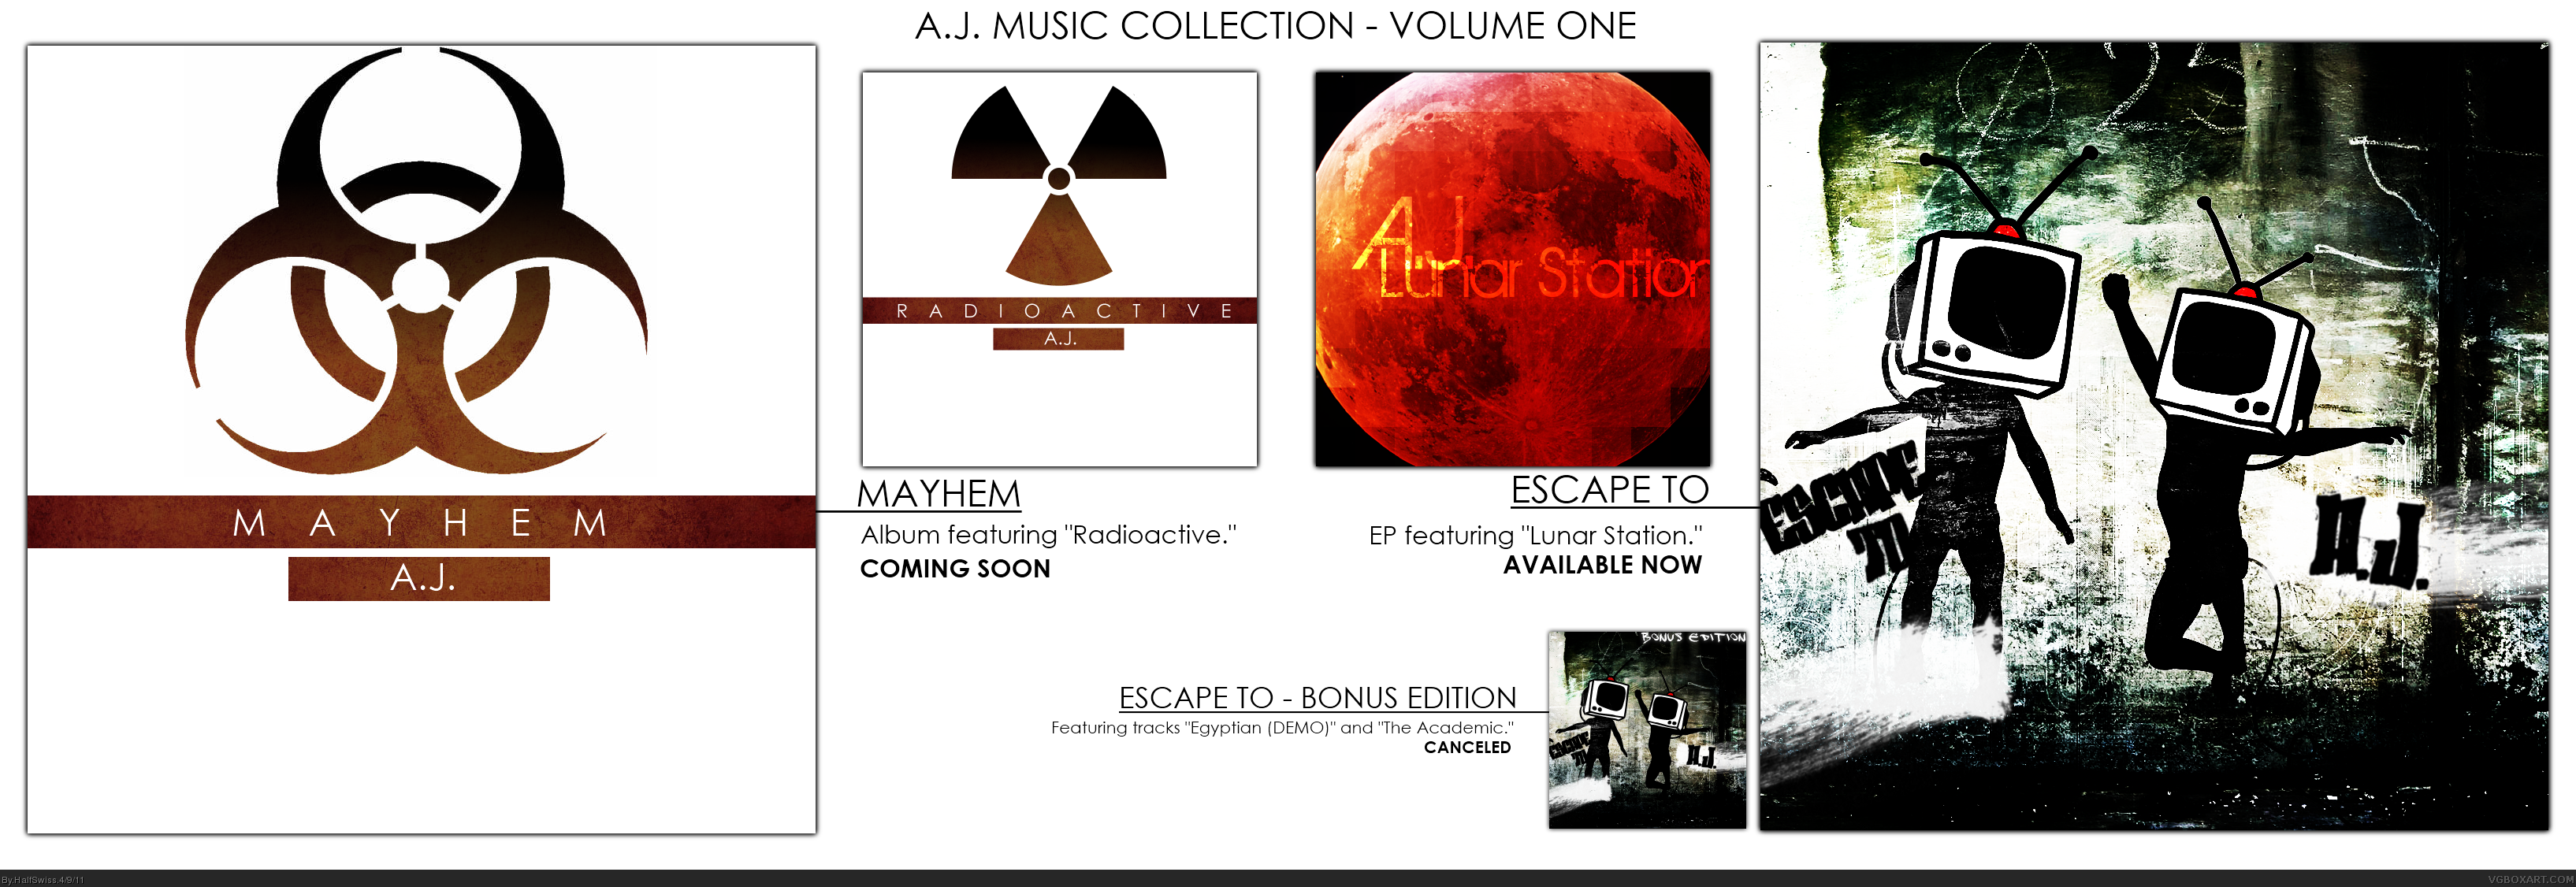 A.J. Music Collection - Volume 1 box cover